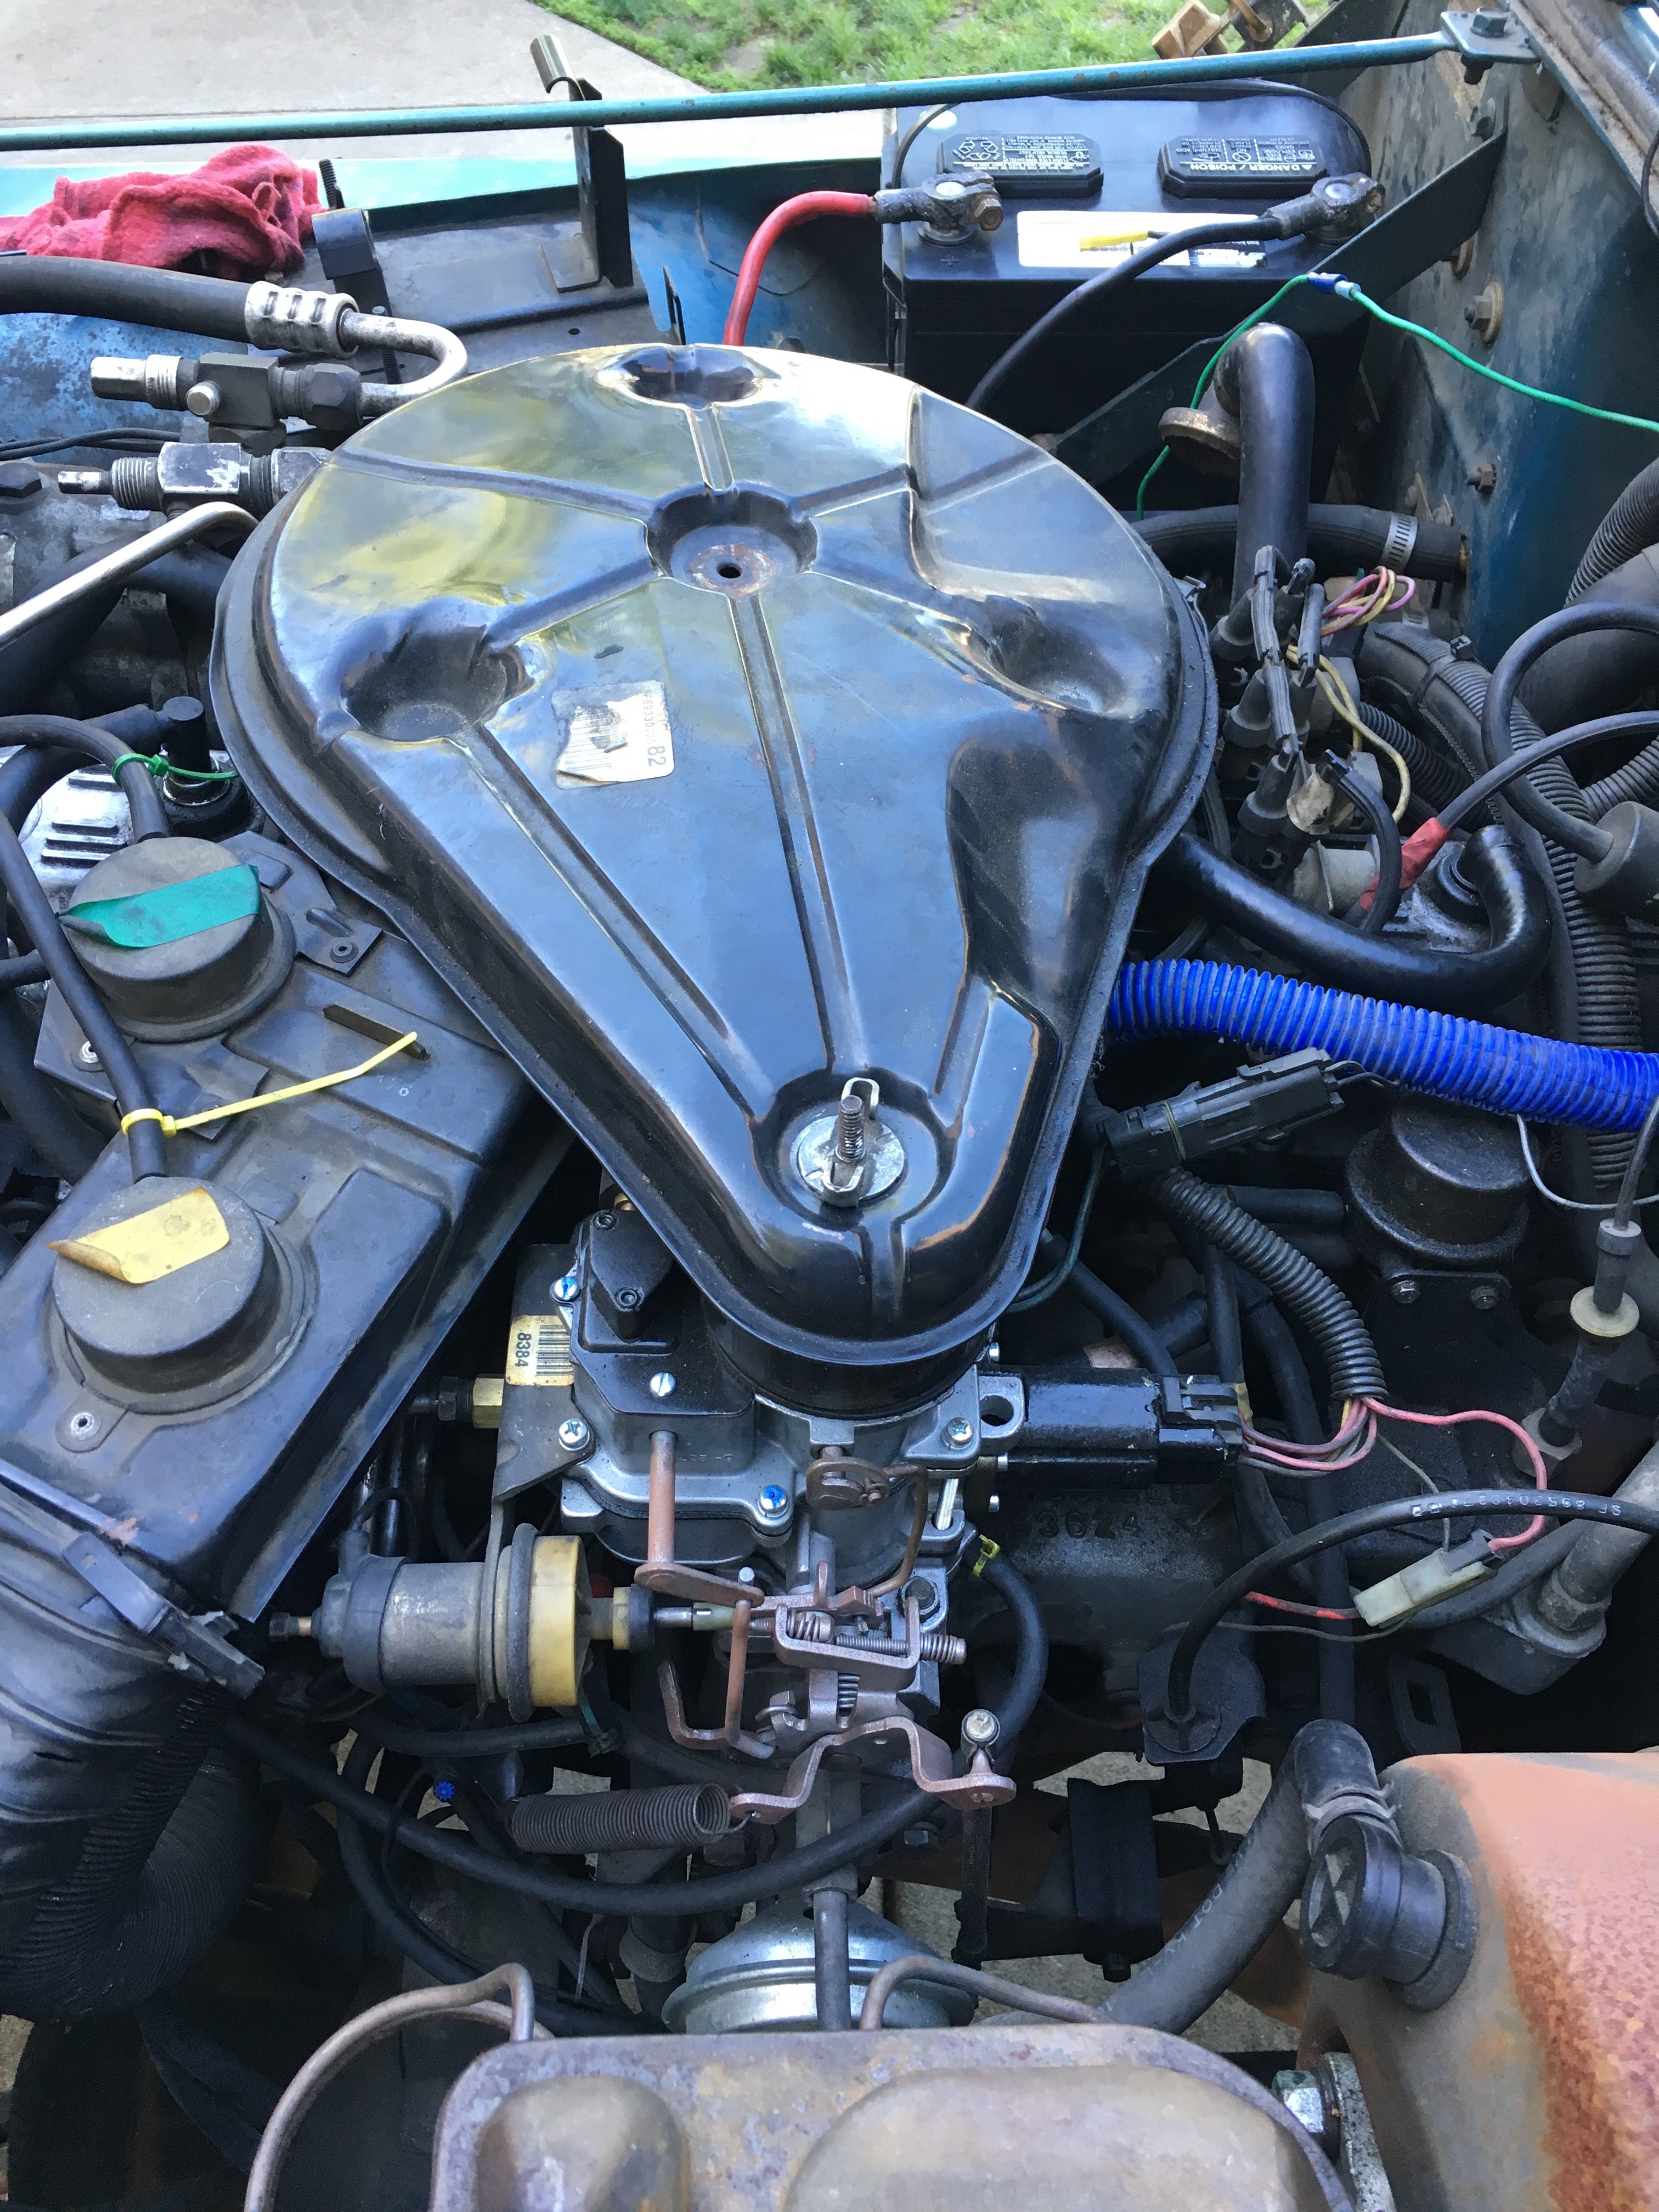 1987 YJ Fuel Injection conversion-Howell | Jeep Enthusiast Forums